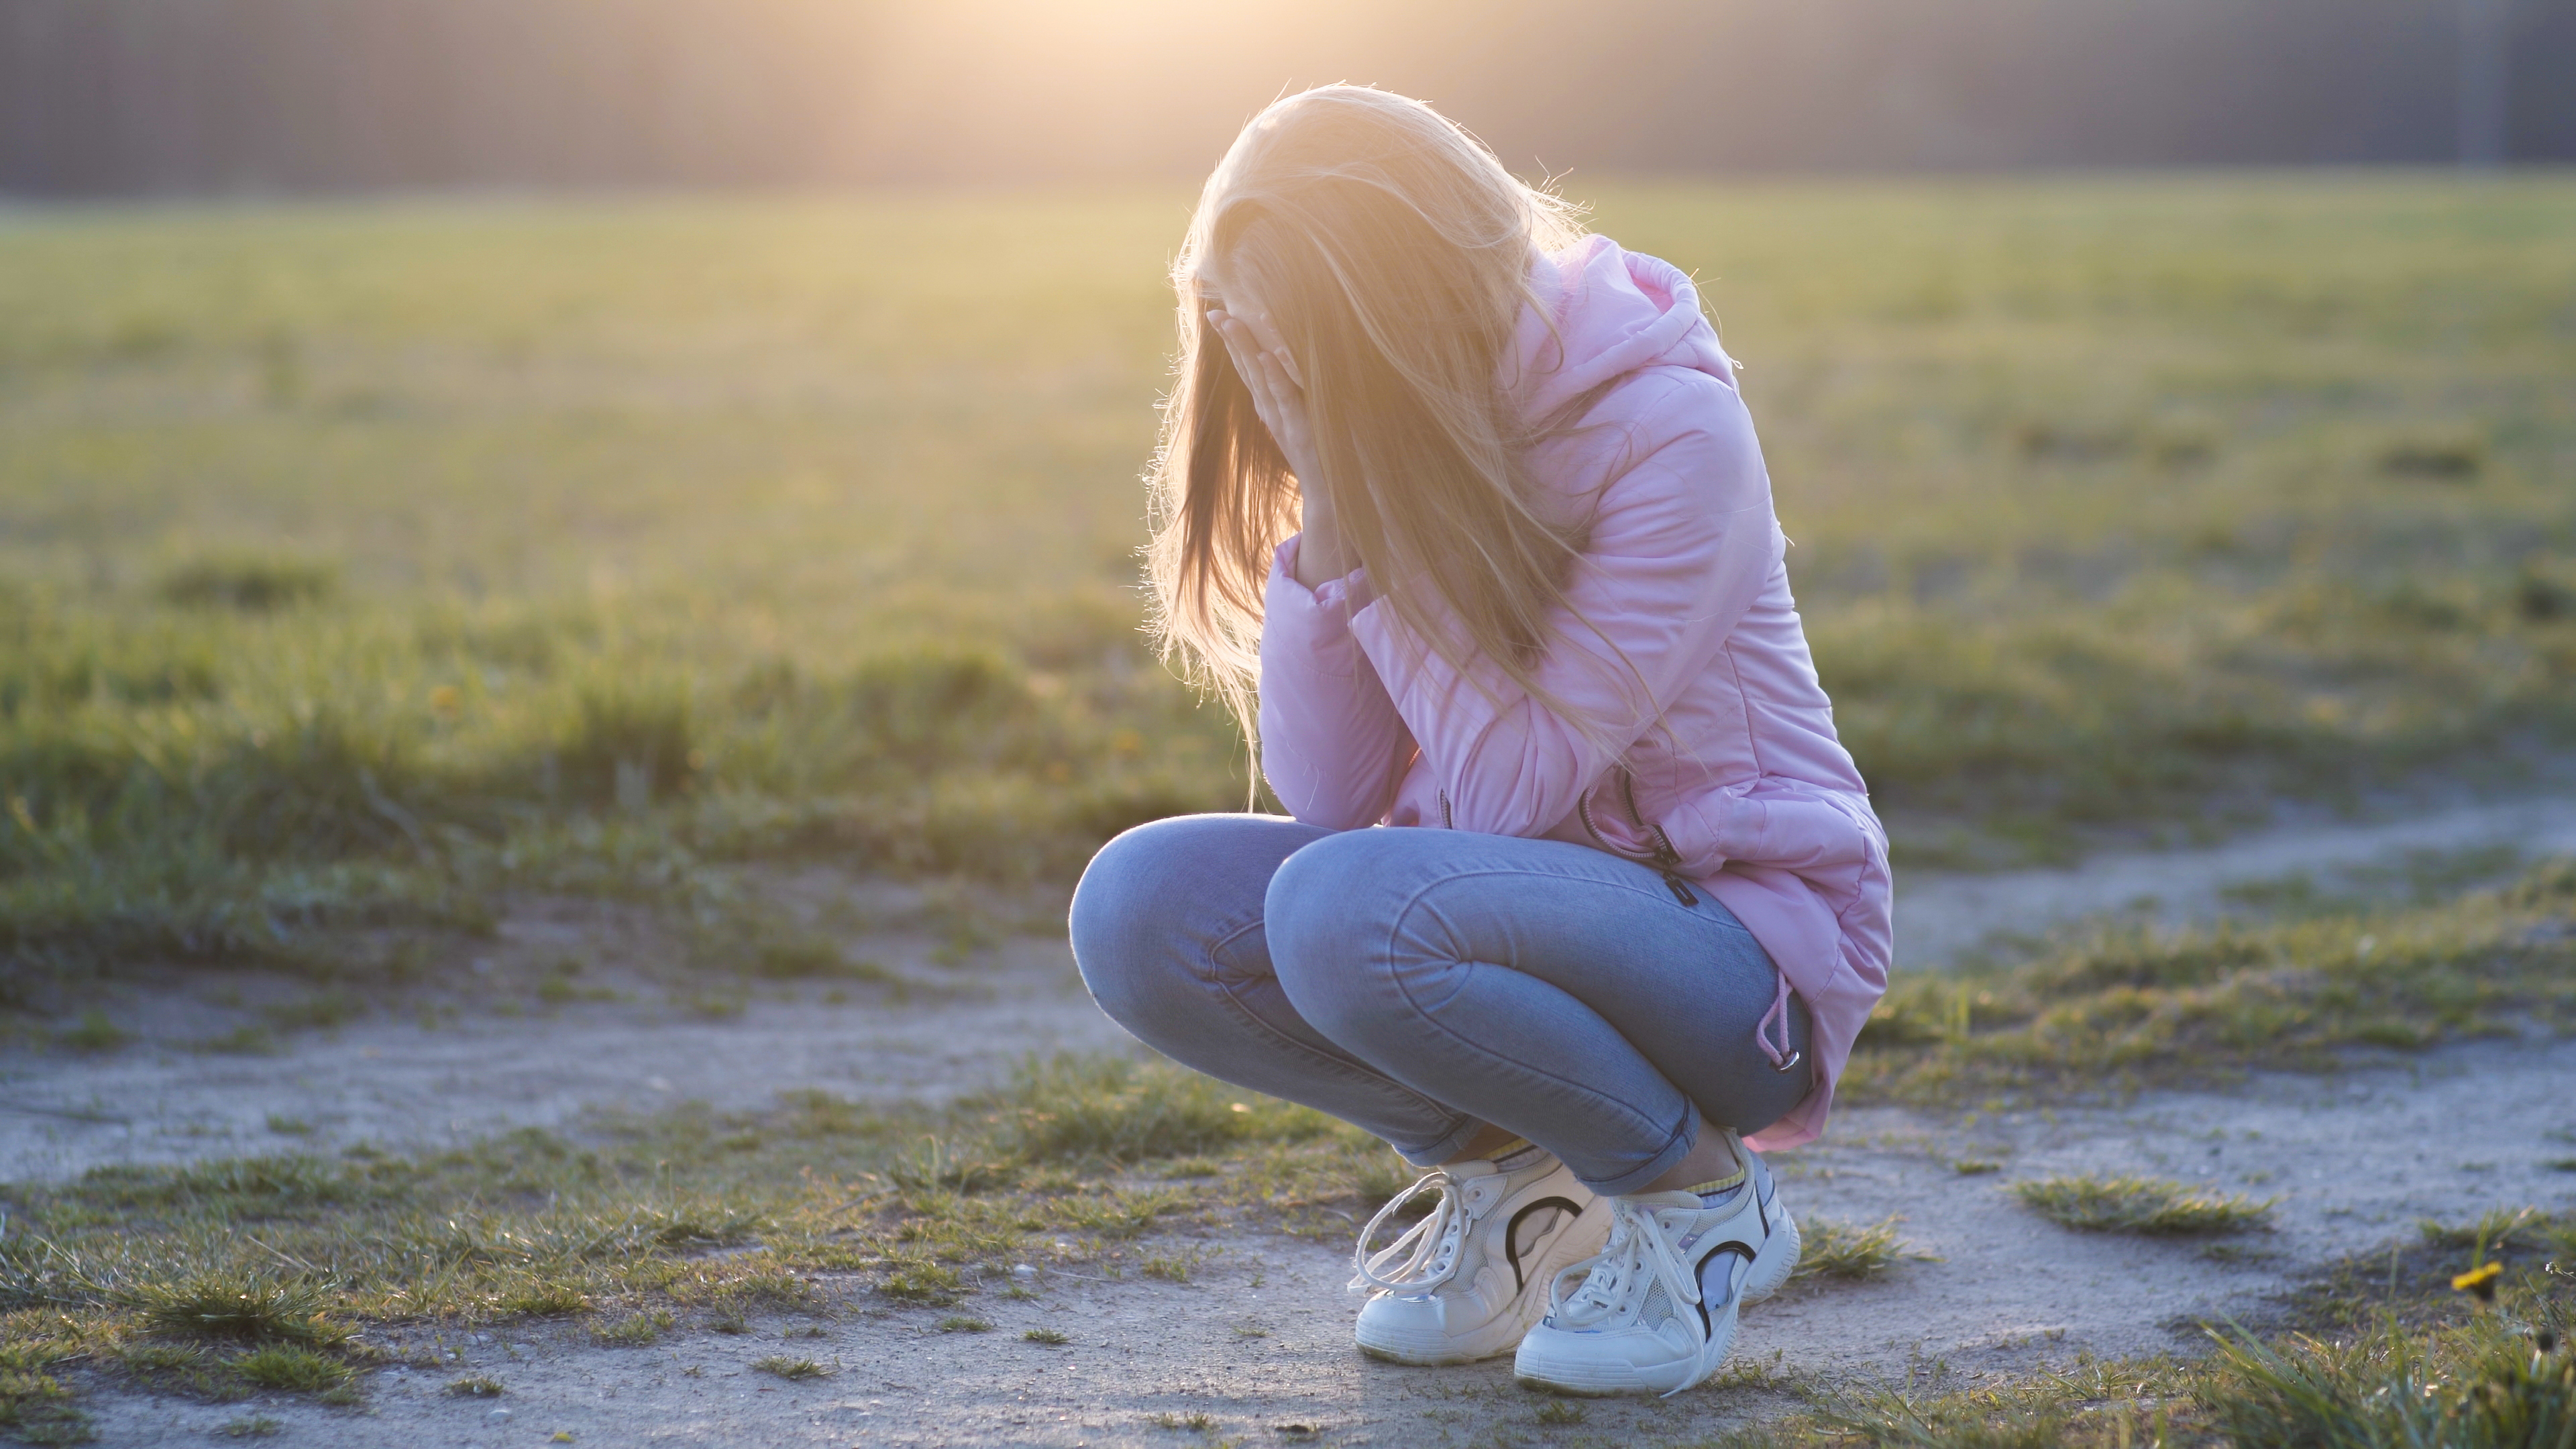 A young girl cries while sitting alone outside | Source: Shutterstock